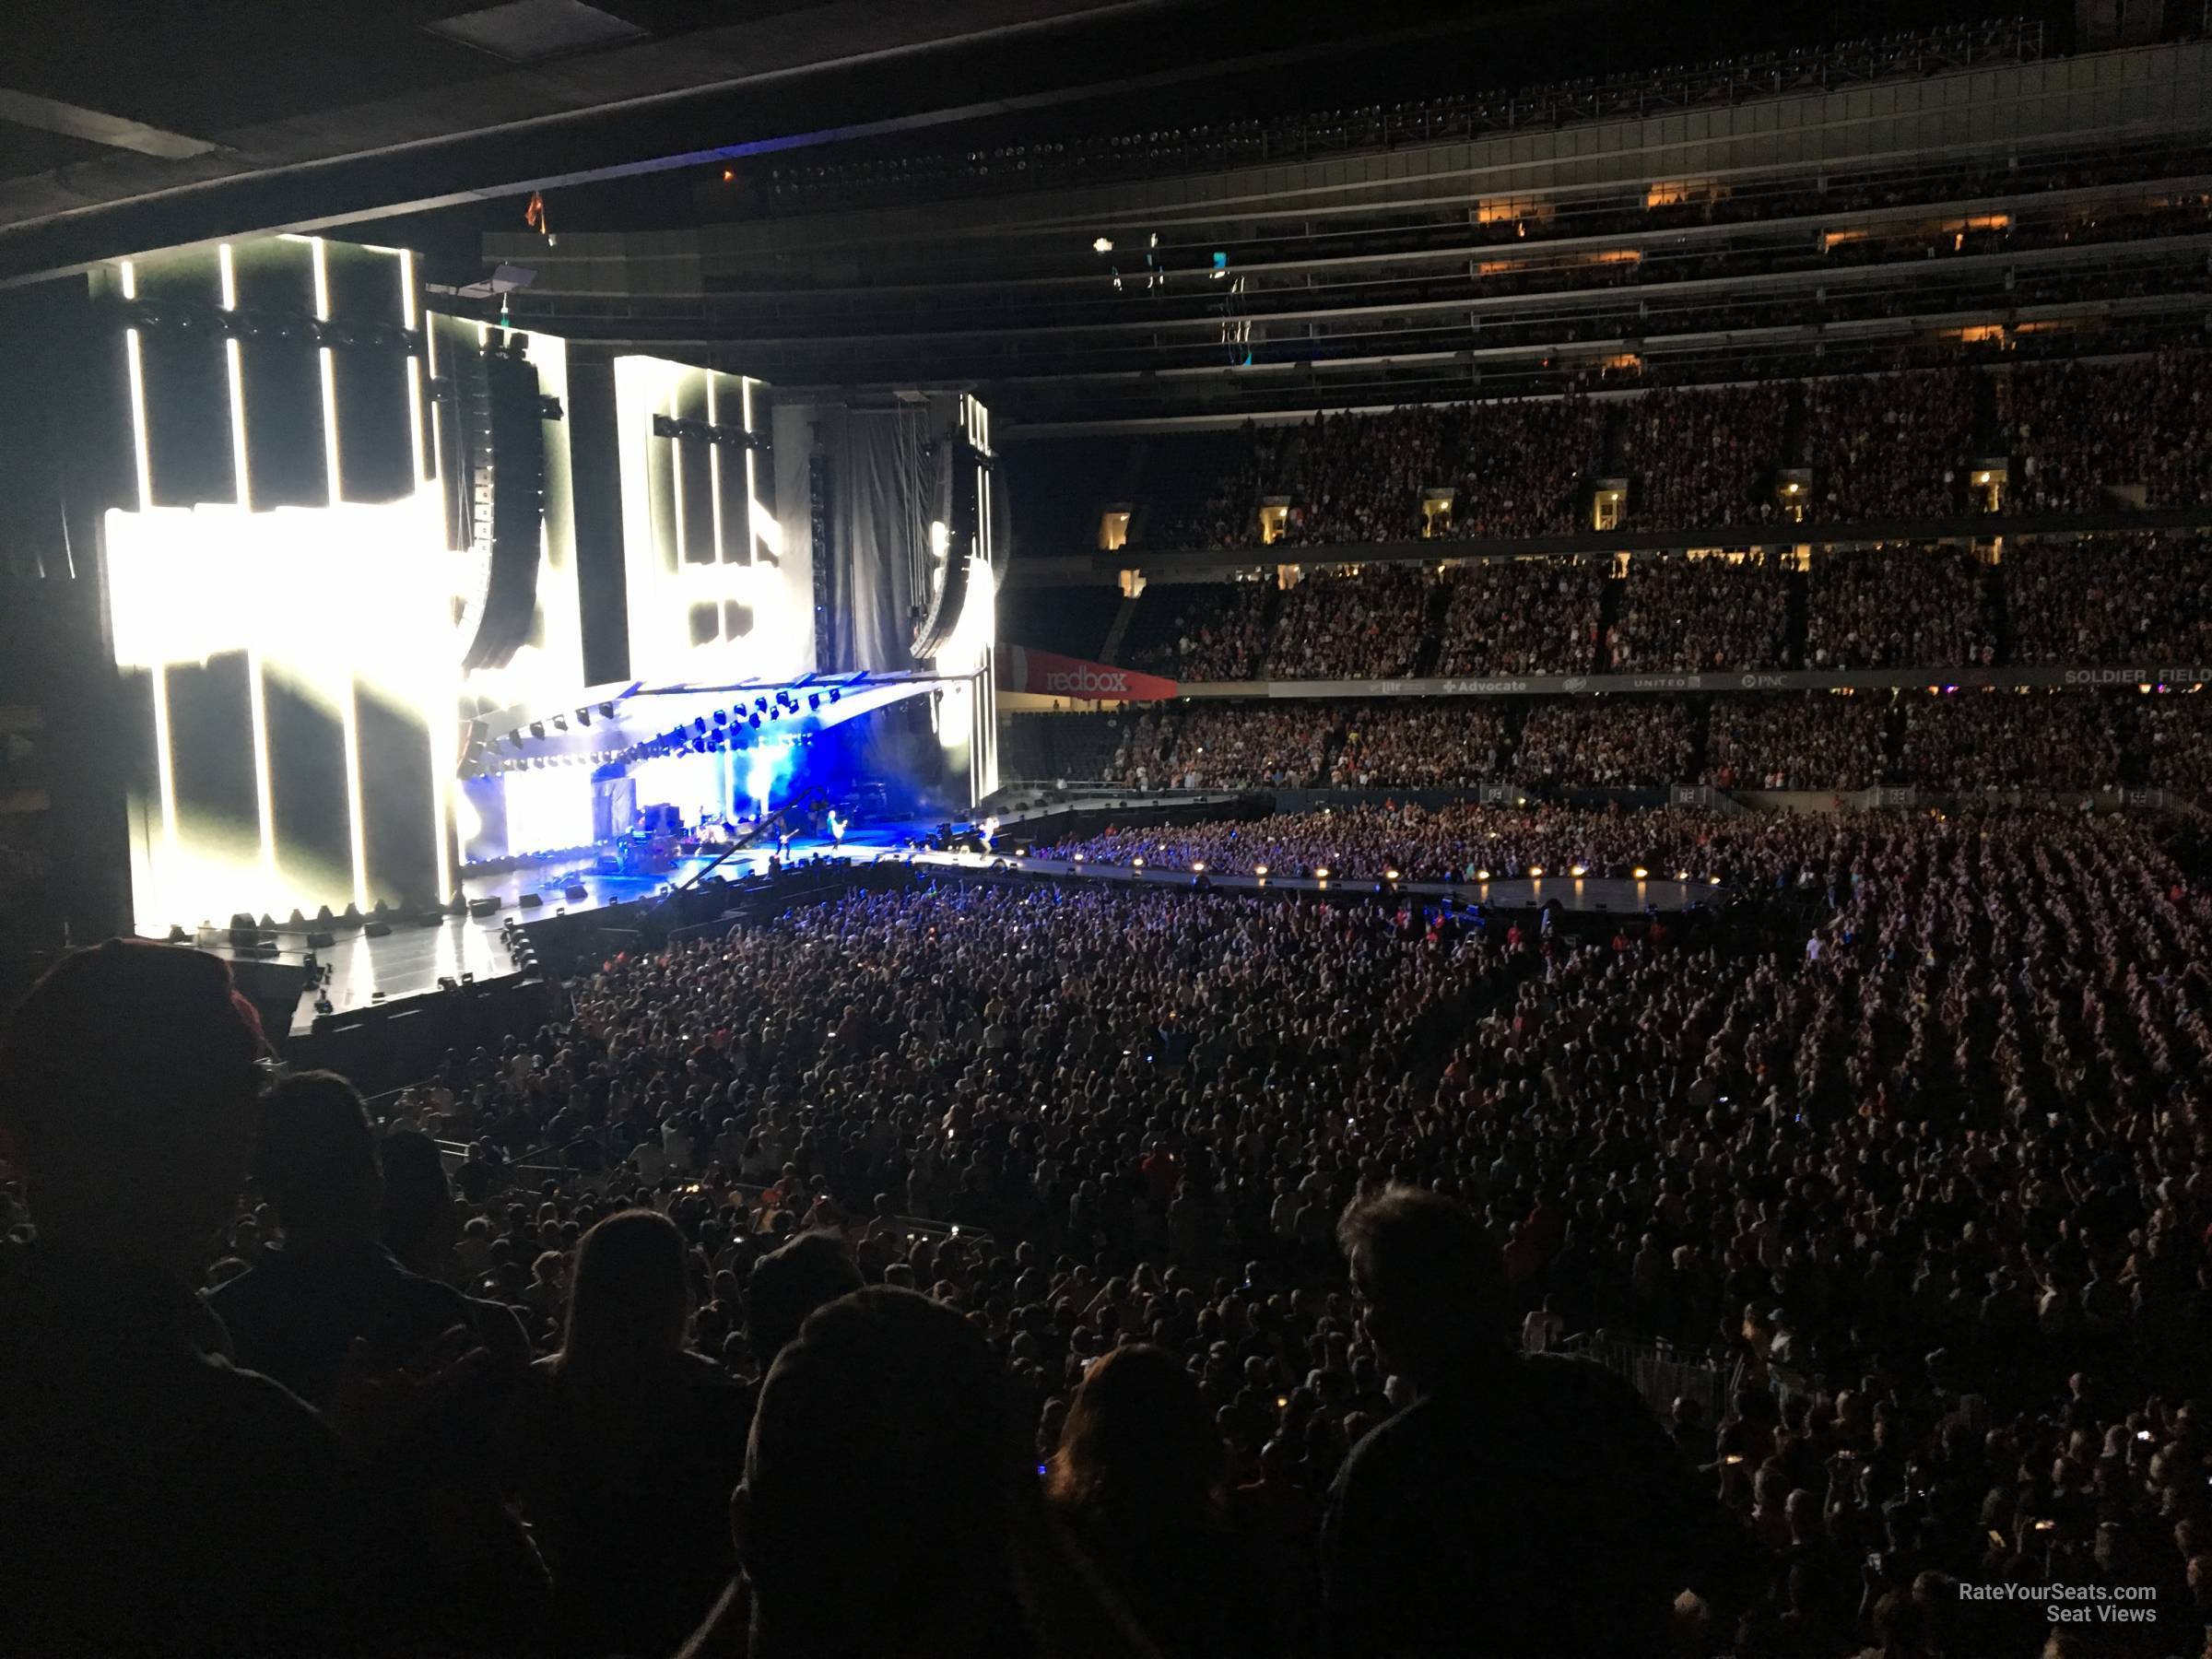 section 239, row 4 seat view  for concert - soldier field